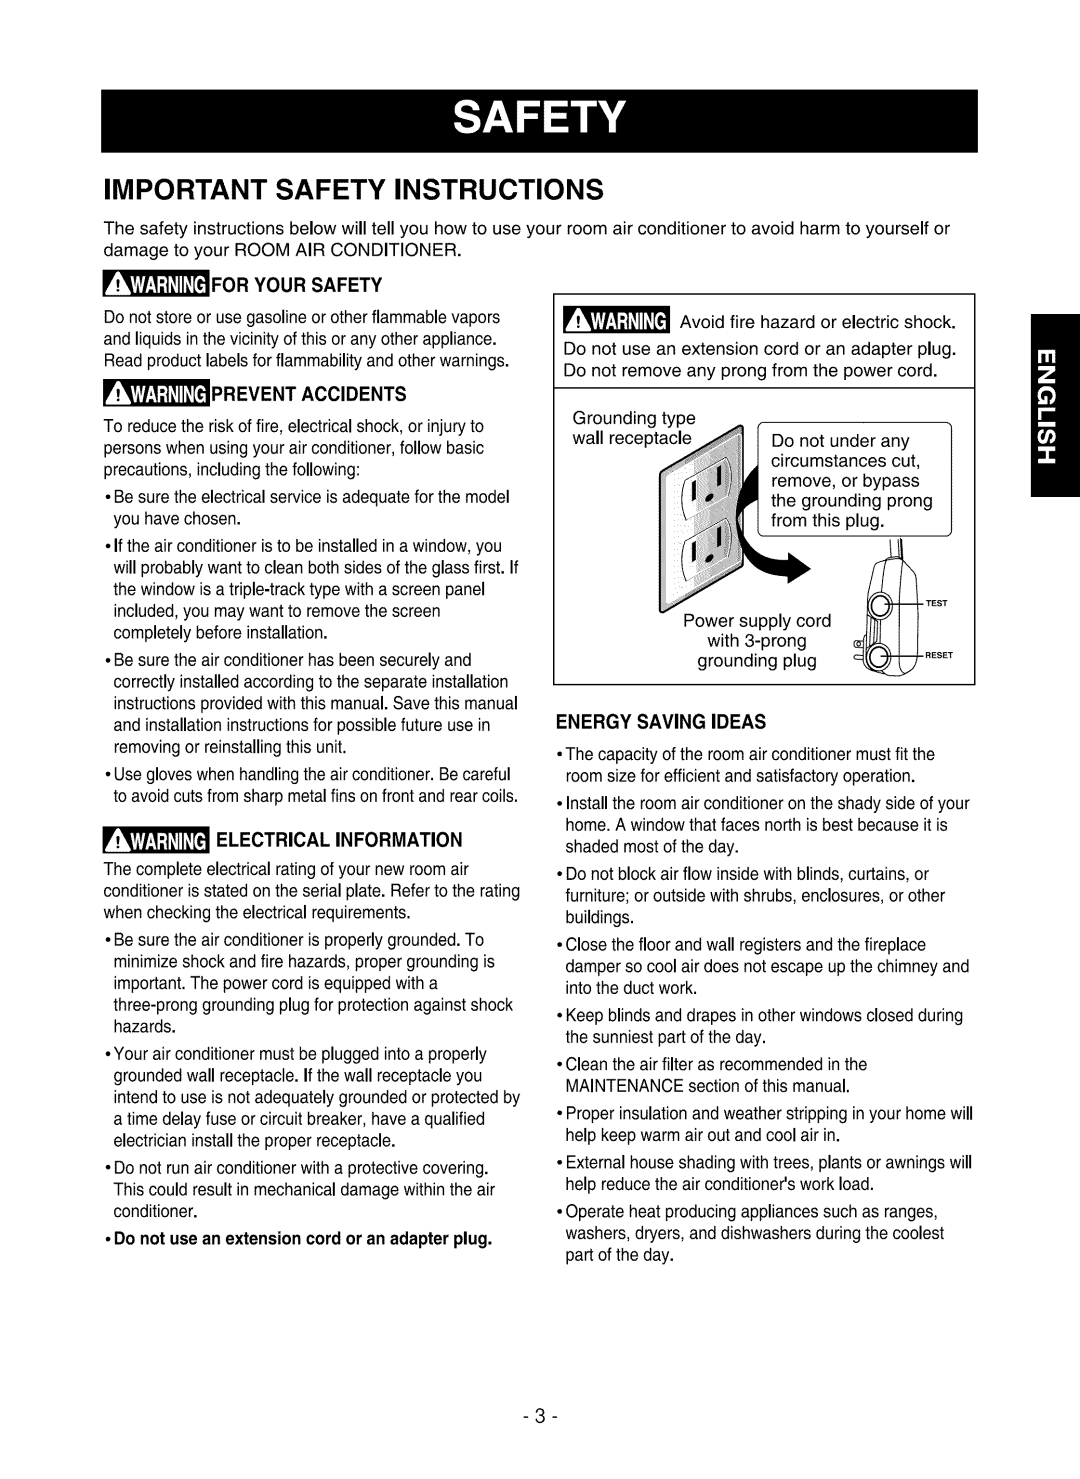 Kenmore 580.75051 owner manual Important Safety Instructions, Energy Savingideas, Electrical Information 